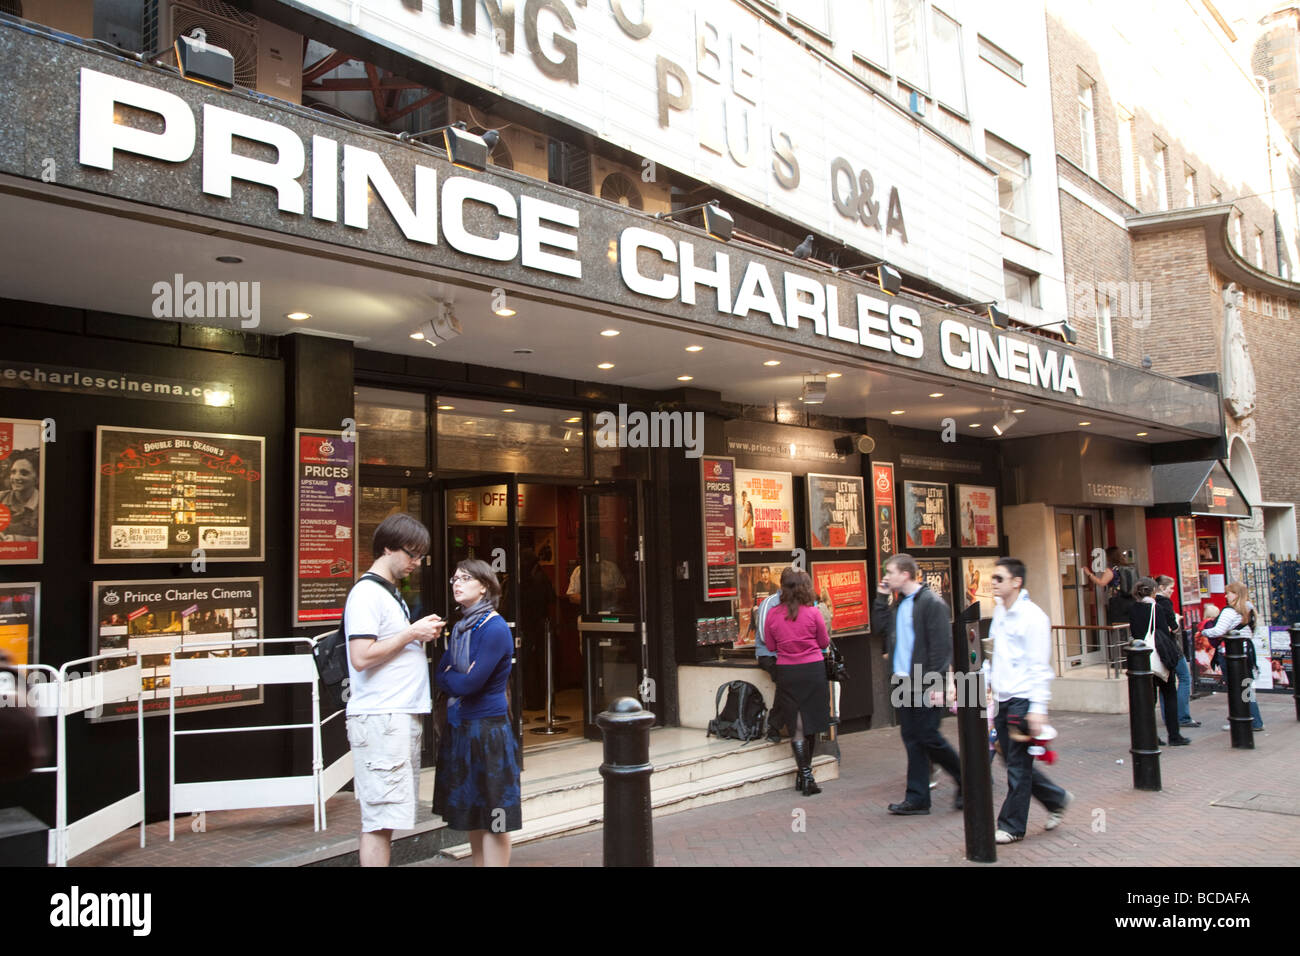 prince charles cinema, china town, leicester square, london uk Stock Photo